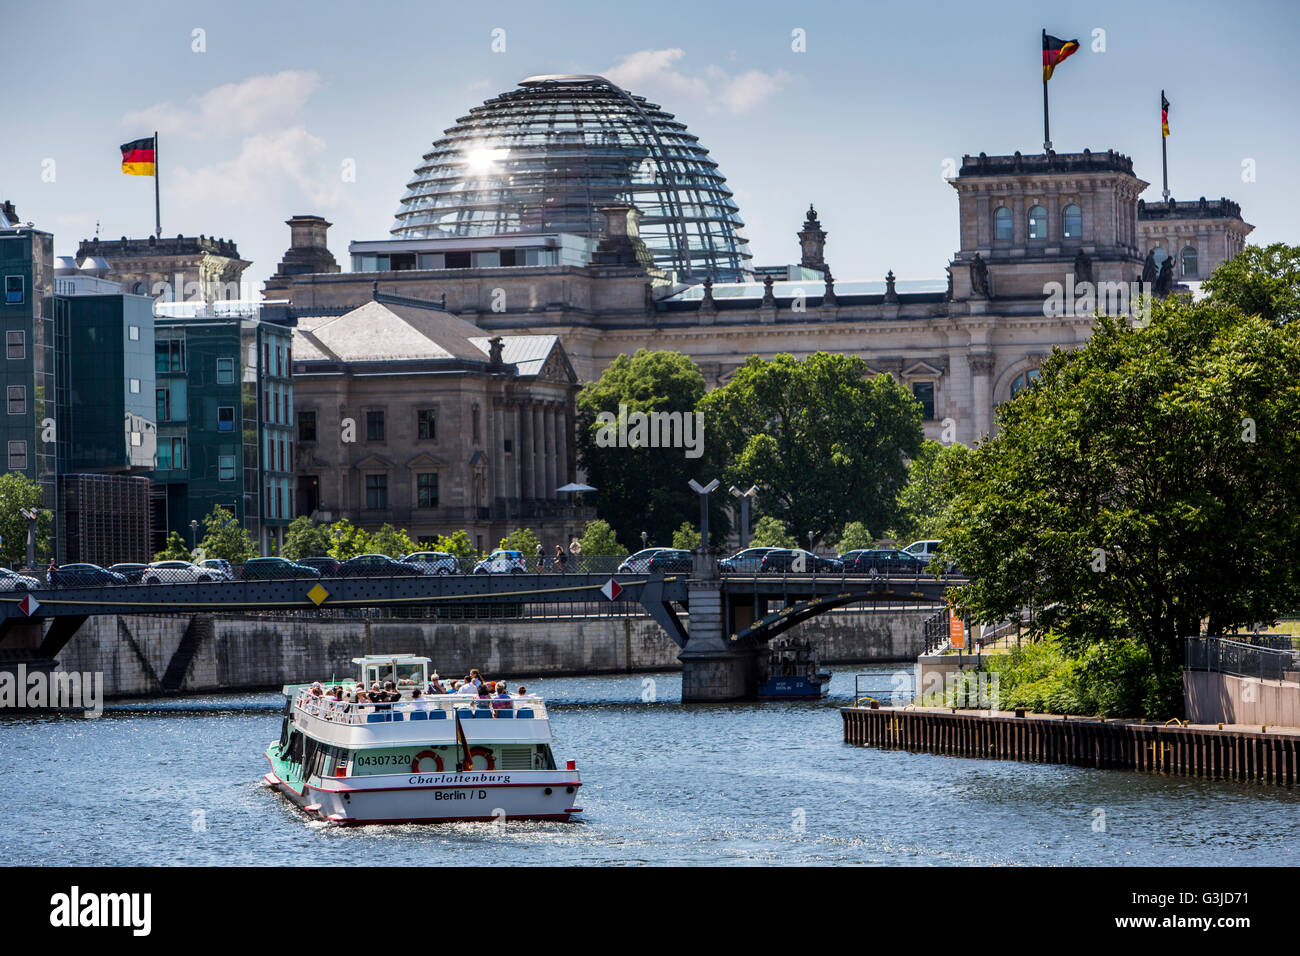 Sightseeing boat on the river Spree, Berlin, Germany, The Reichstag, German parliament building, Stock Photo